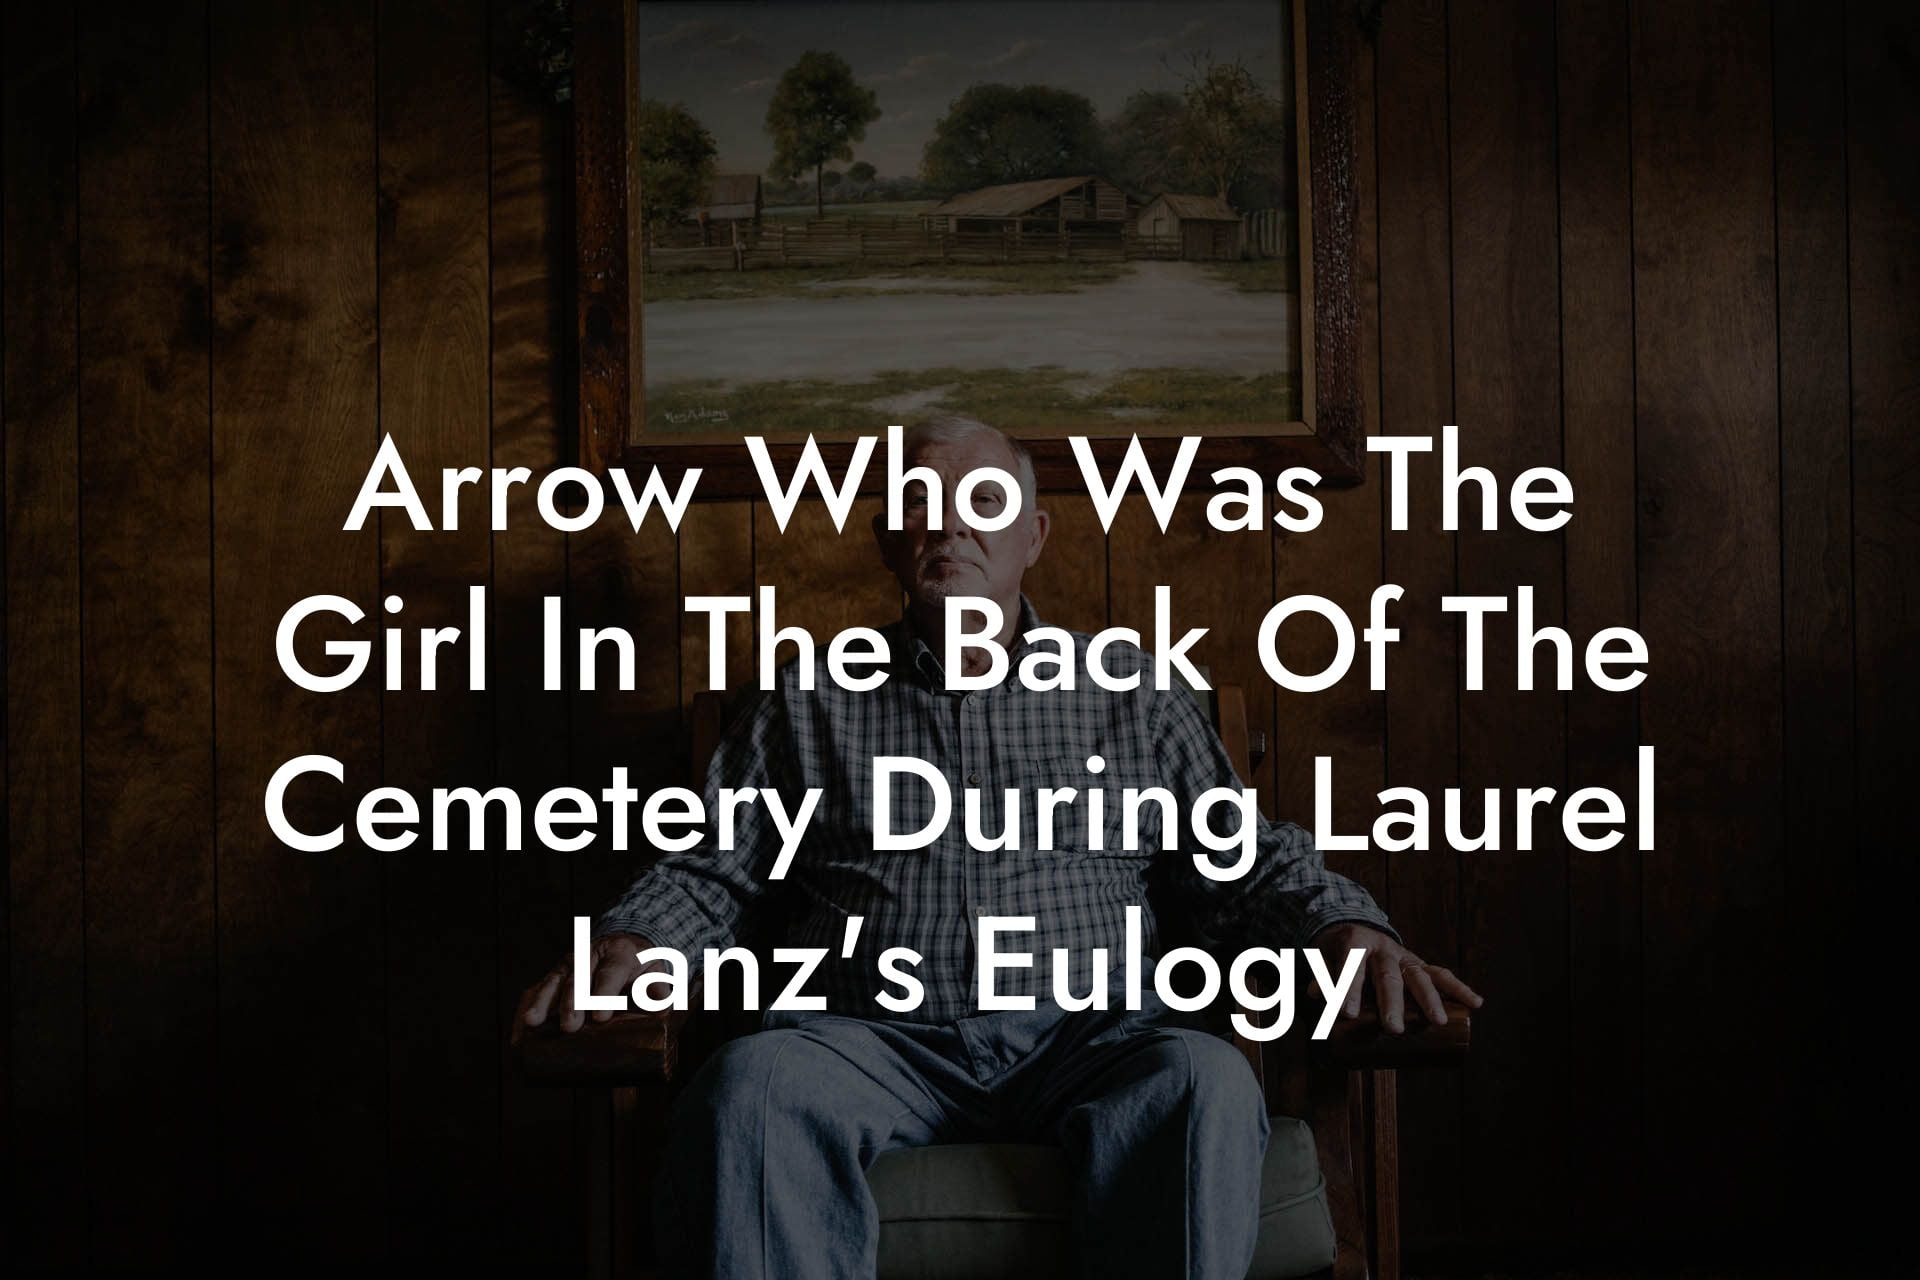 Arrow Who Was The Girl In The Back Of The Cemetery During Laurel Lanz's Eulogy